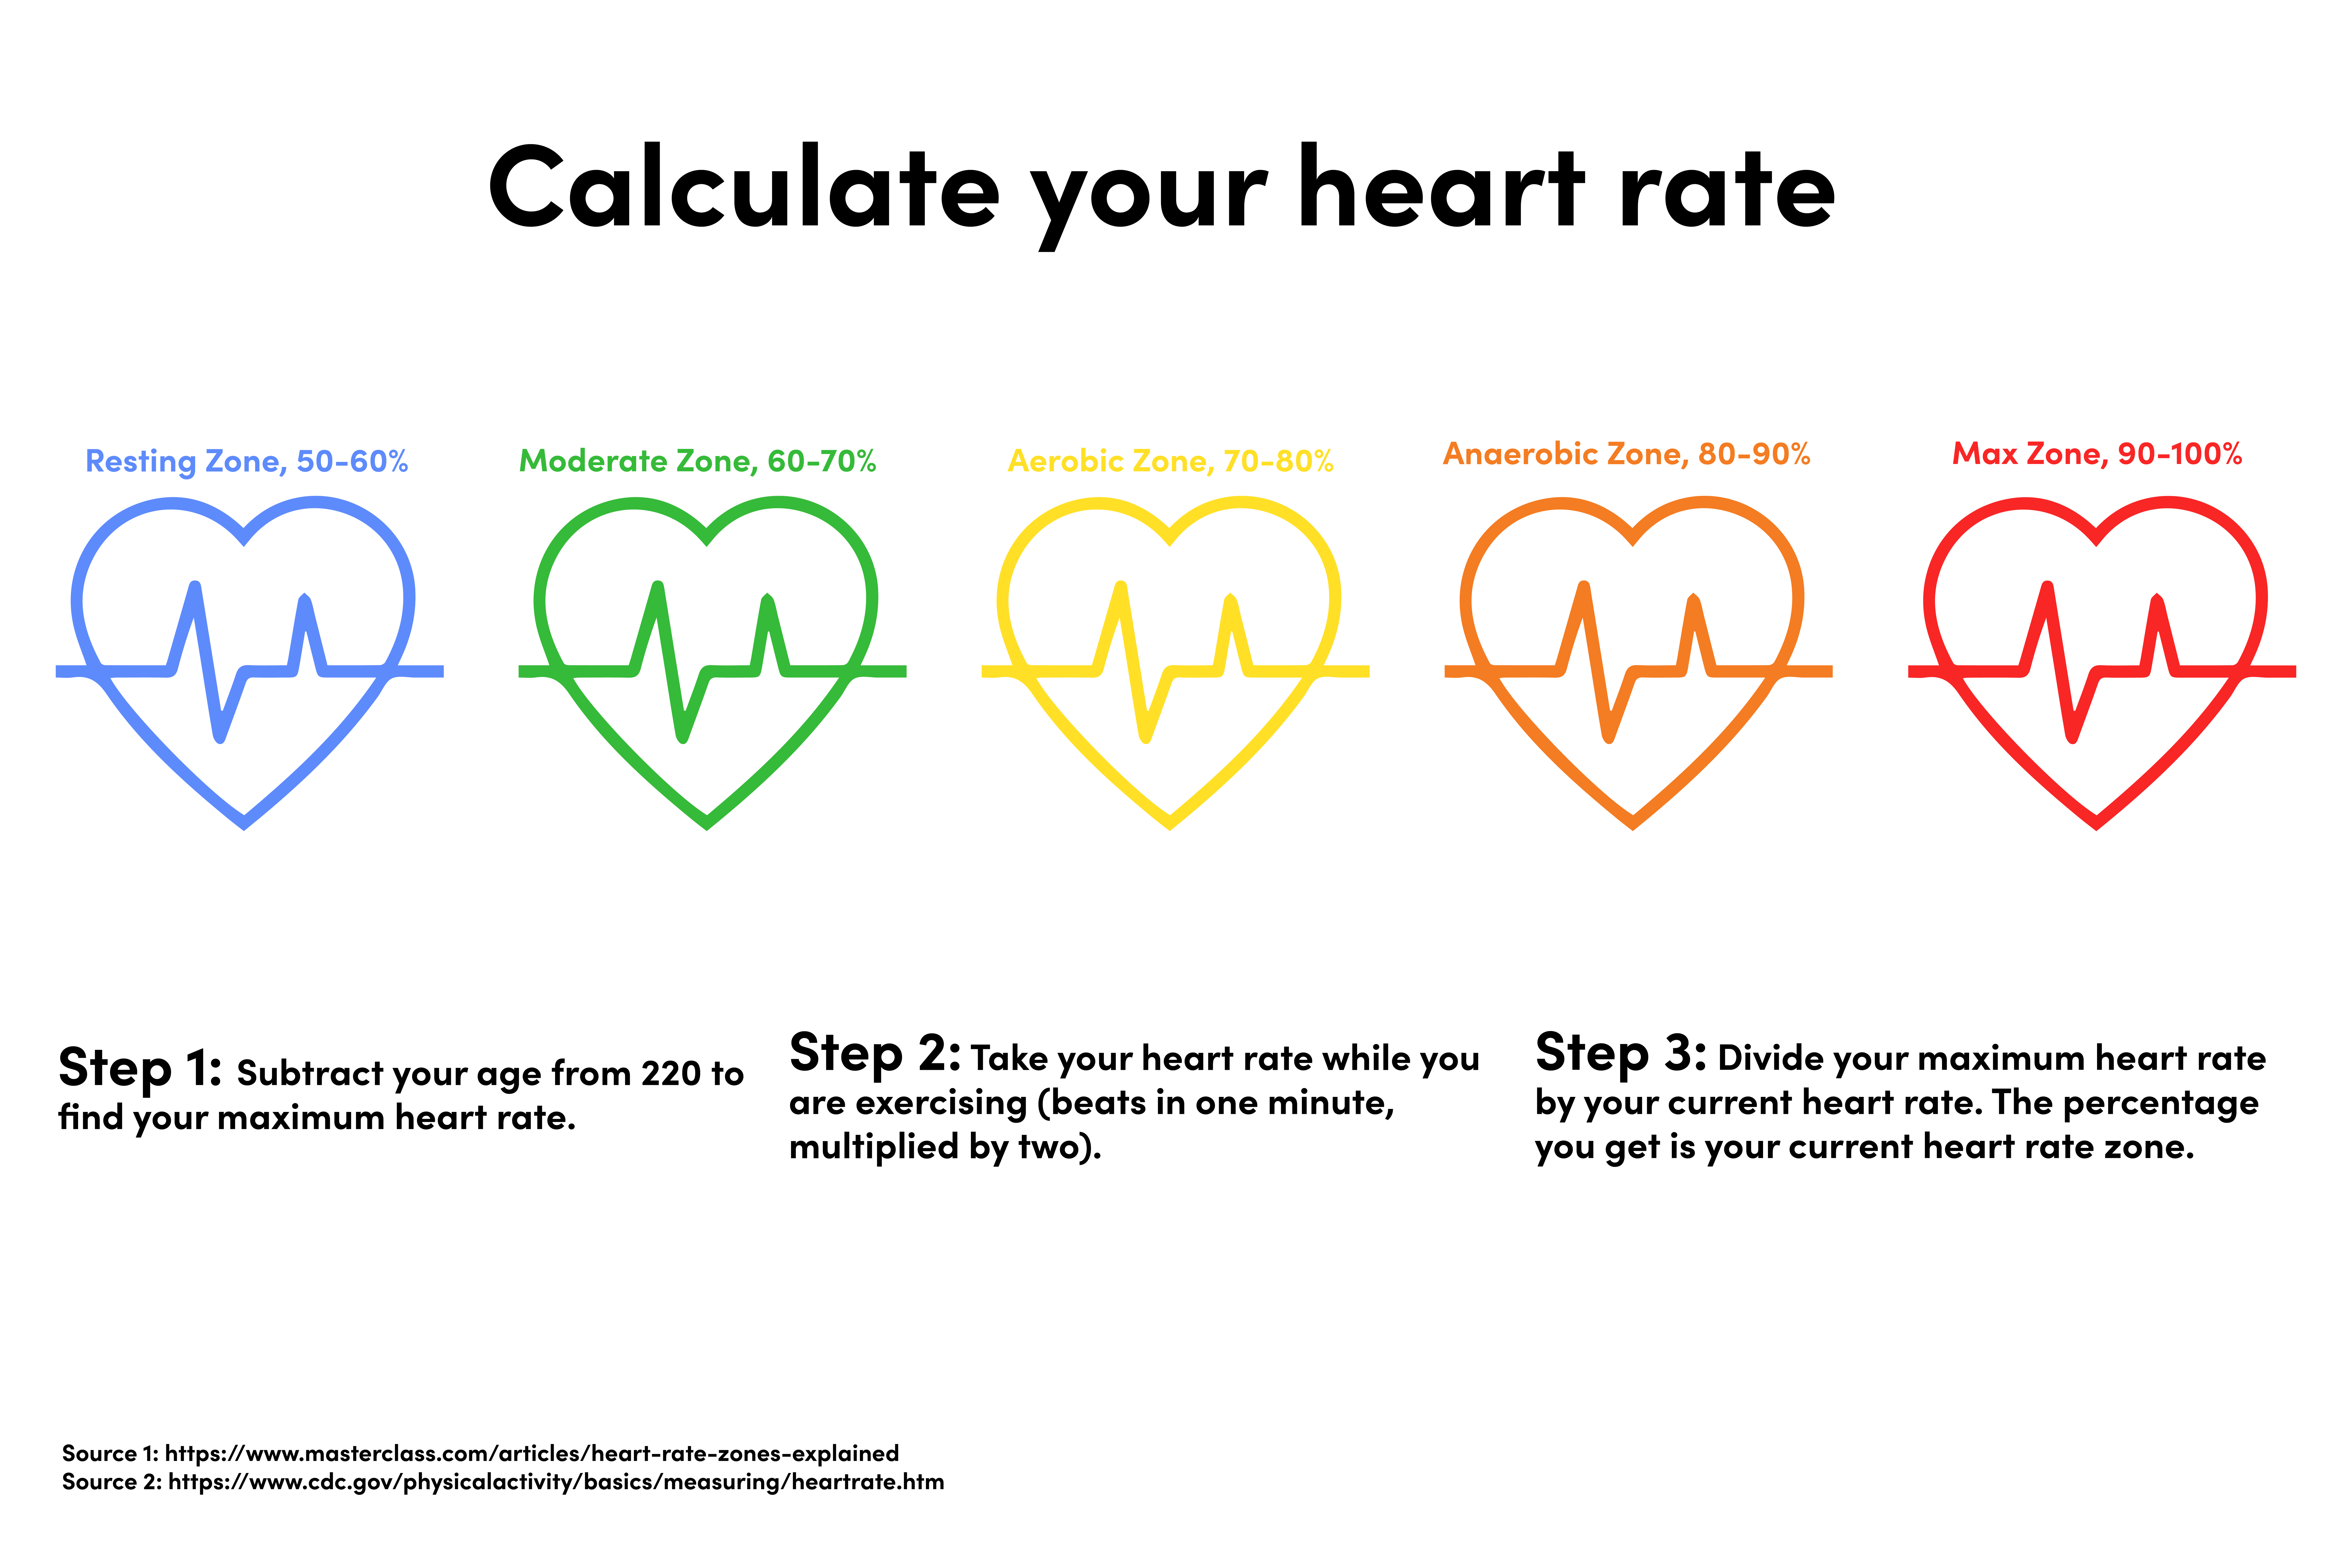 Calculate your heart rate